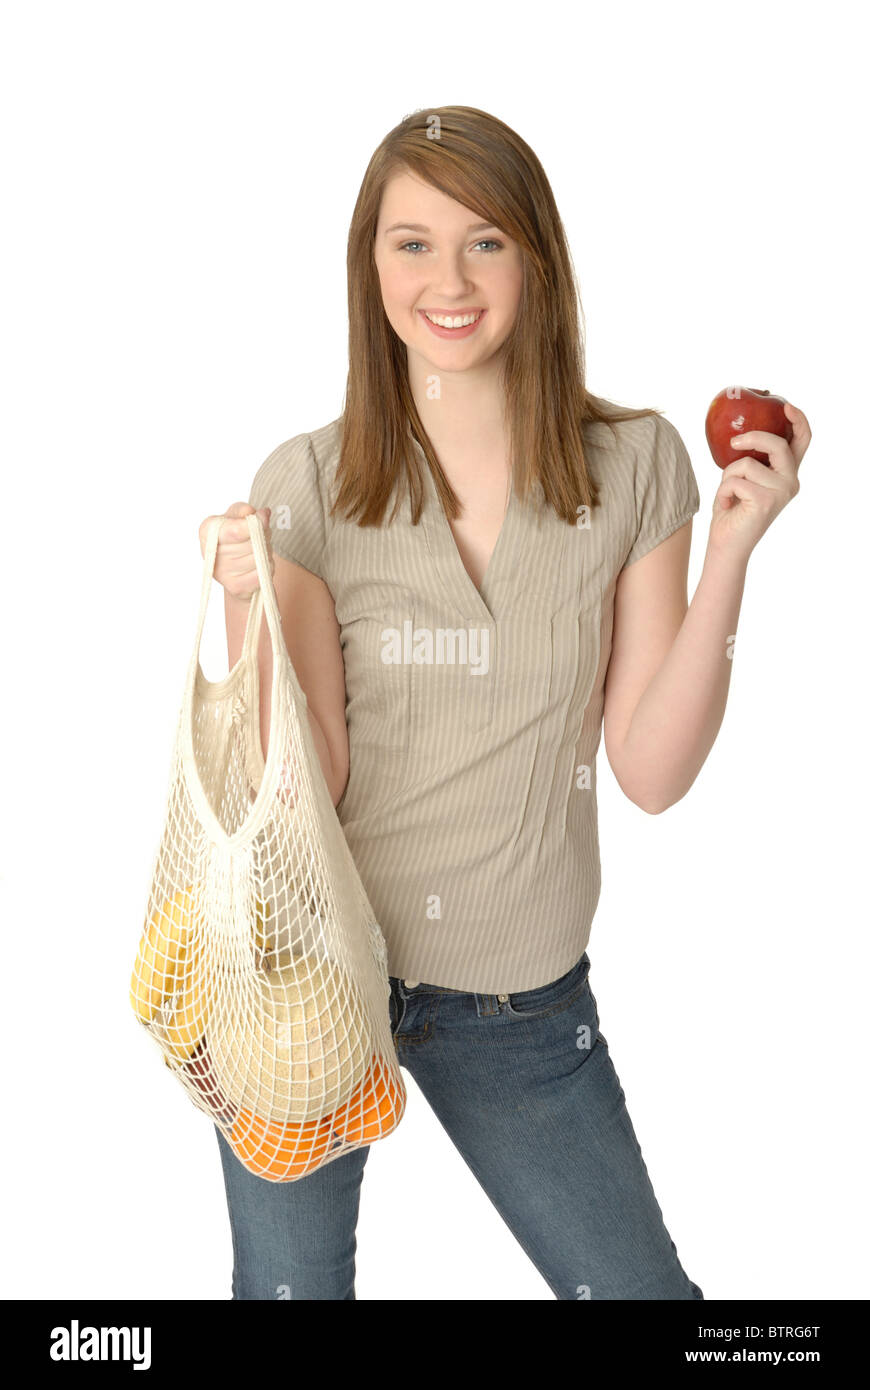 Young woman with environmentally-friendly reusable string shopping bag filled with fresh fruit, holding an apple. Stock Photo